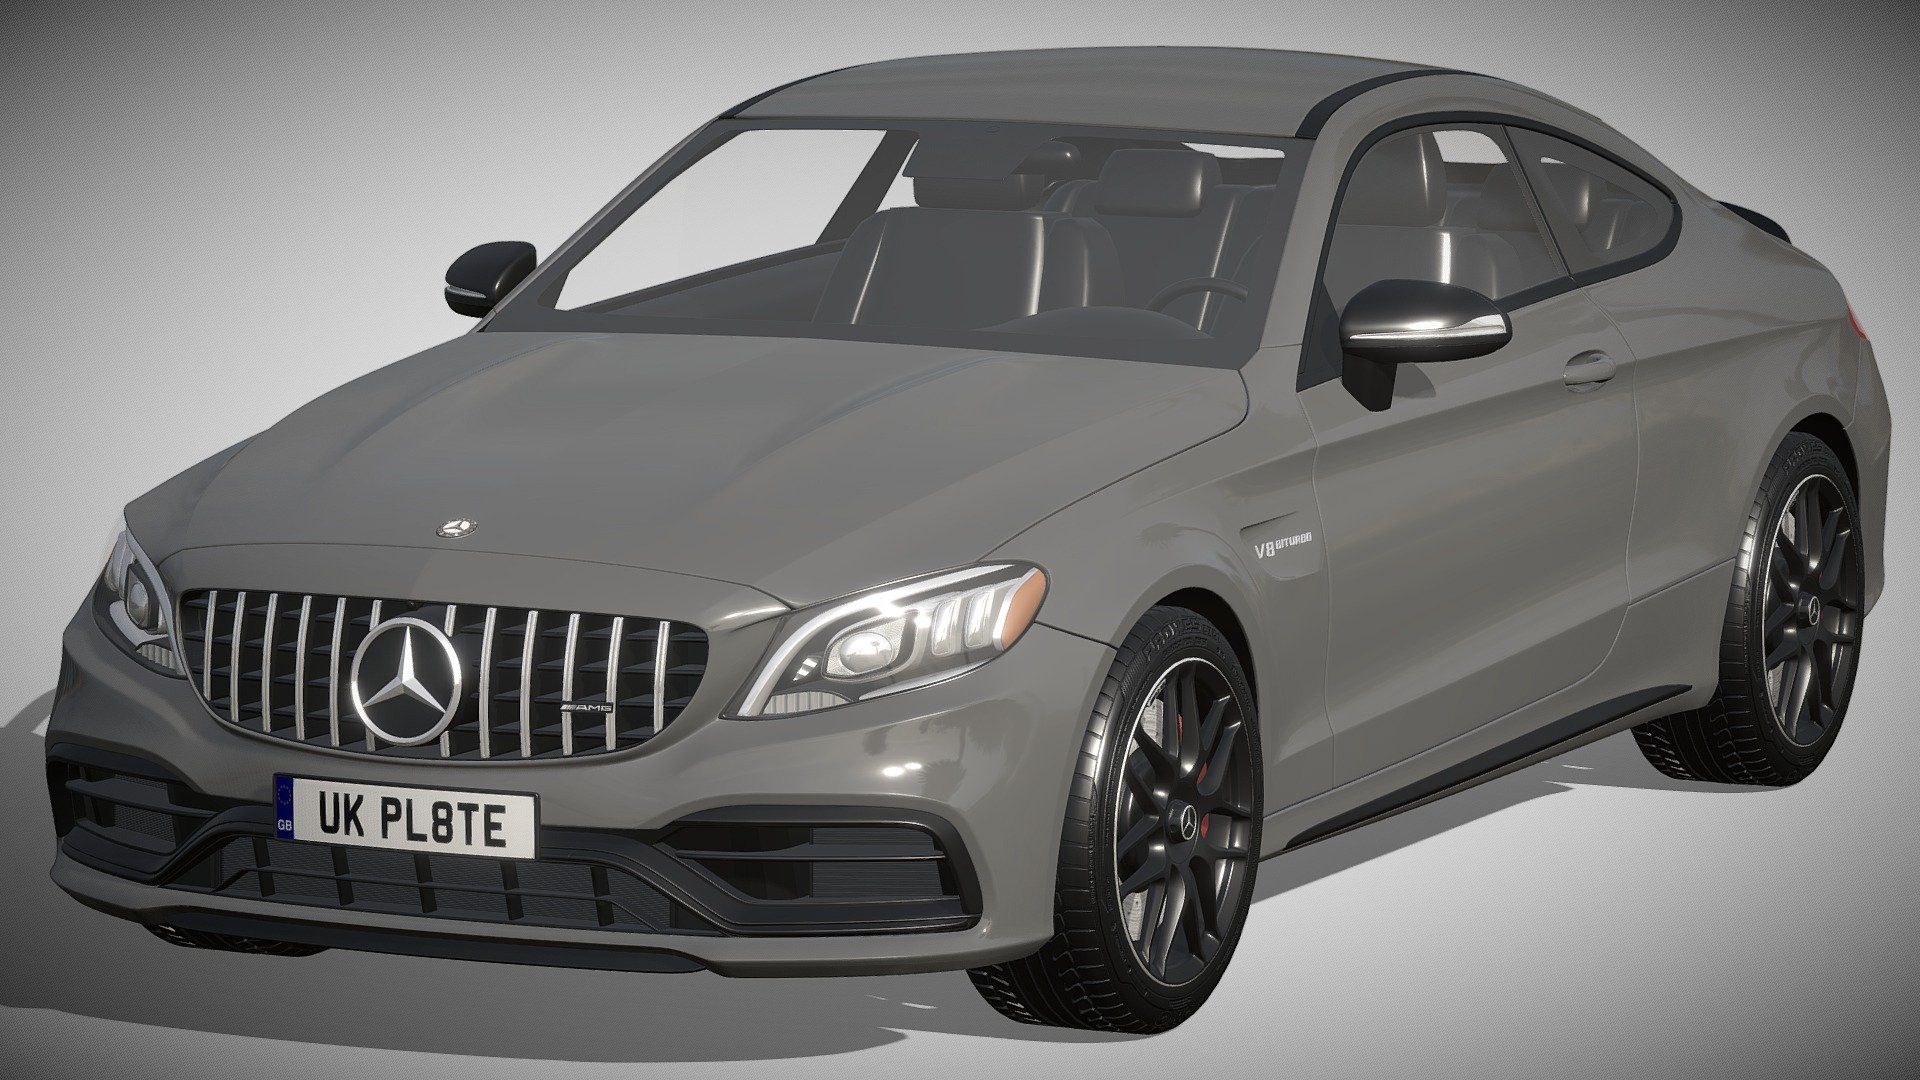 Mercedes-Benz C63 Coupe 2020

https://www.mbusa.com/en/vehicles/build/c-class/coupe/c63c

Clean geometry Light weight model, yet completely detailed for HI-Res renders. Use for movies, Advertisements or games

Corona render and materials

All textures include in *.rar files

Lighting setup is not included in the file! - Mercedes-Benz C63 Coupe 2020 - Buy Royalty Free 3D model by zifir3d 3d model